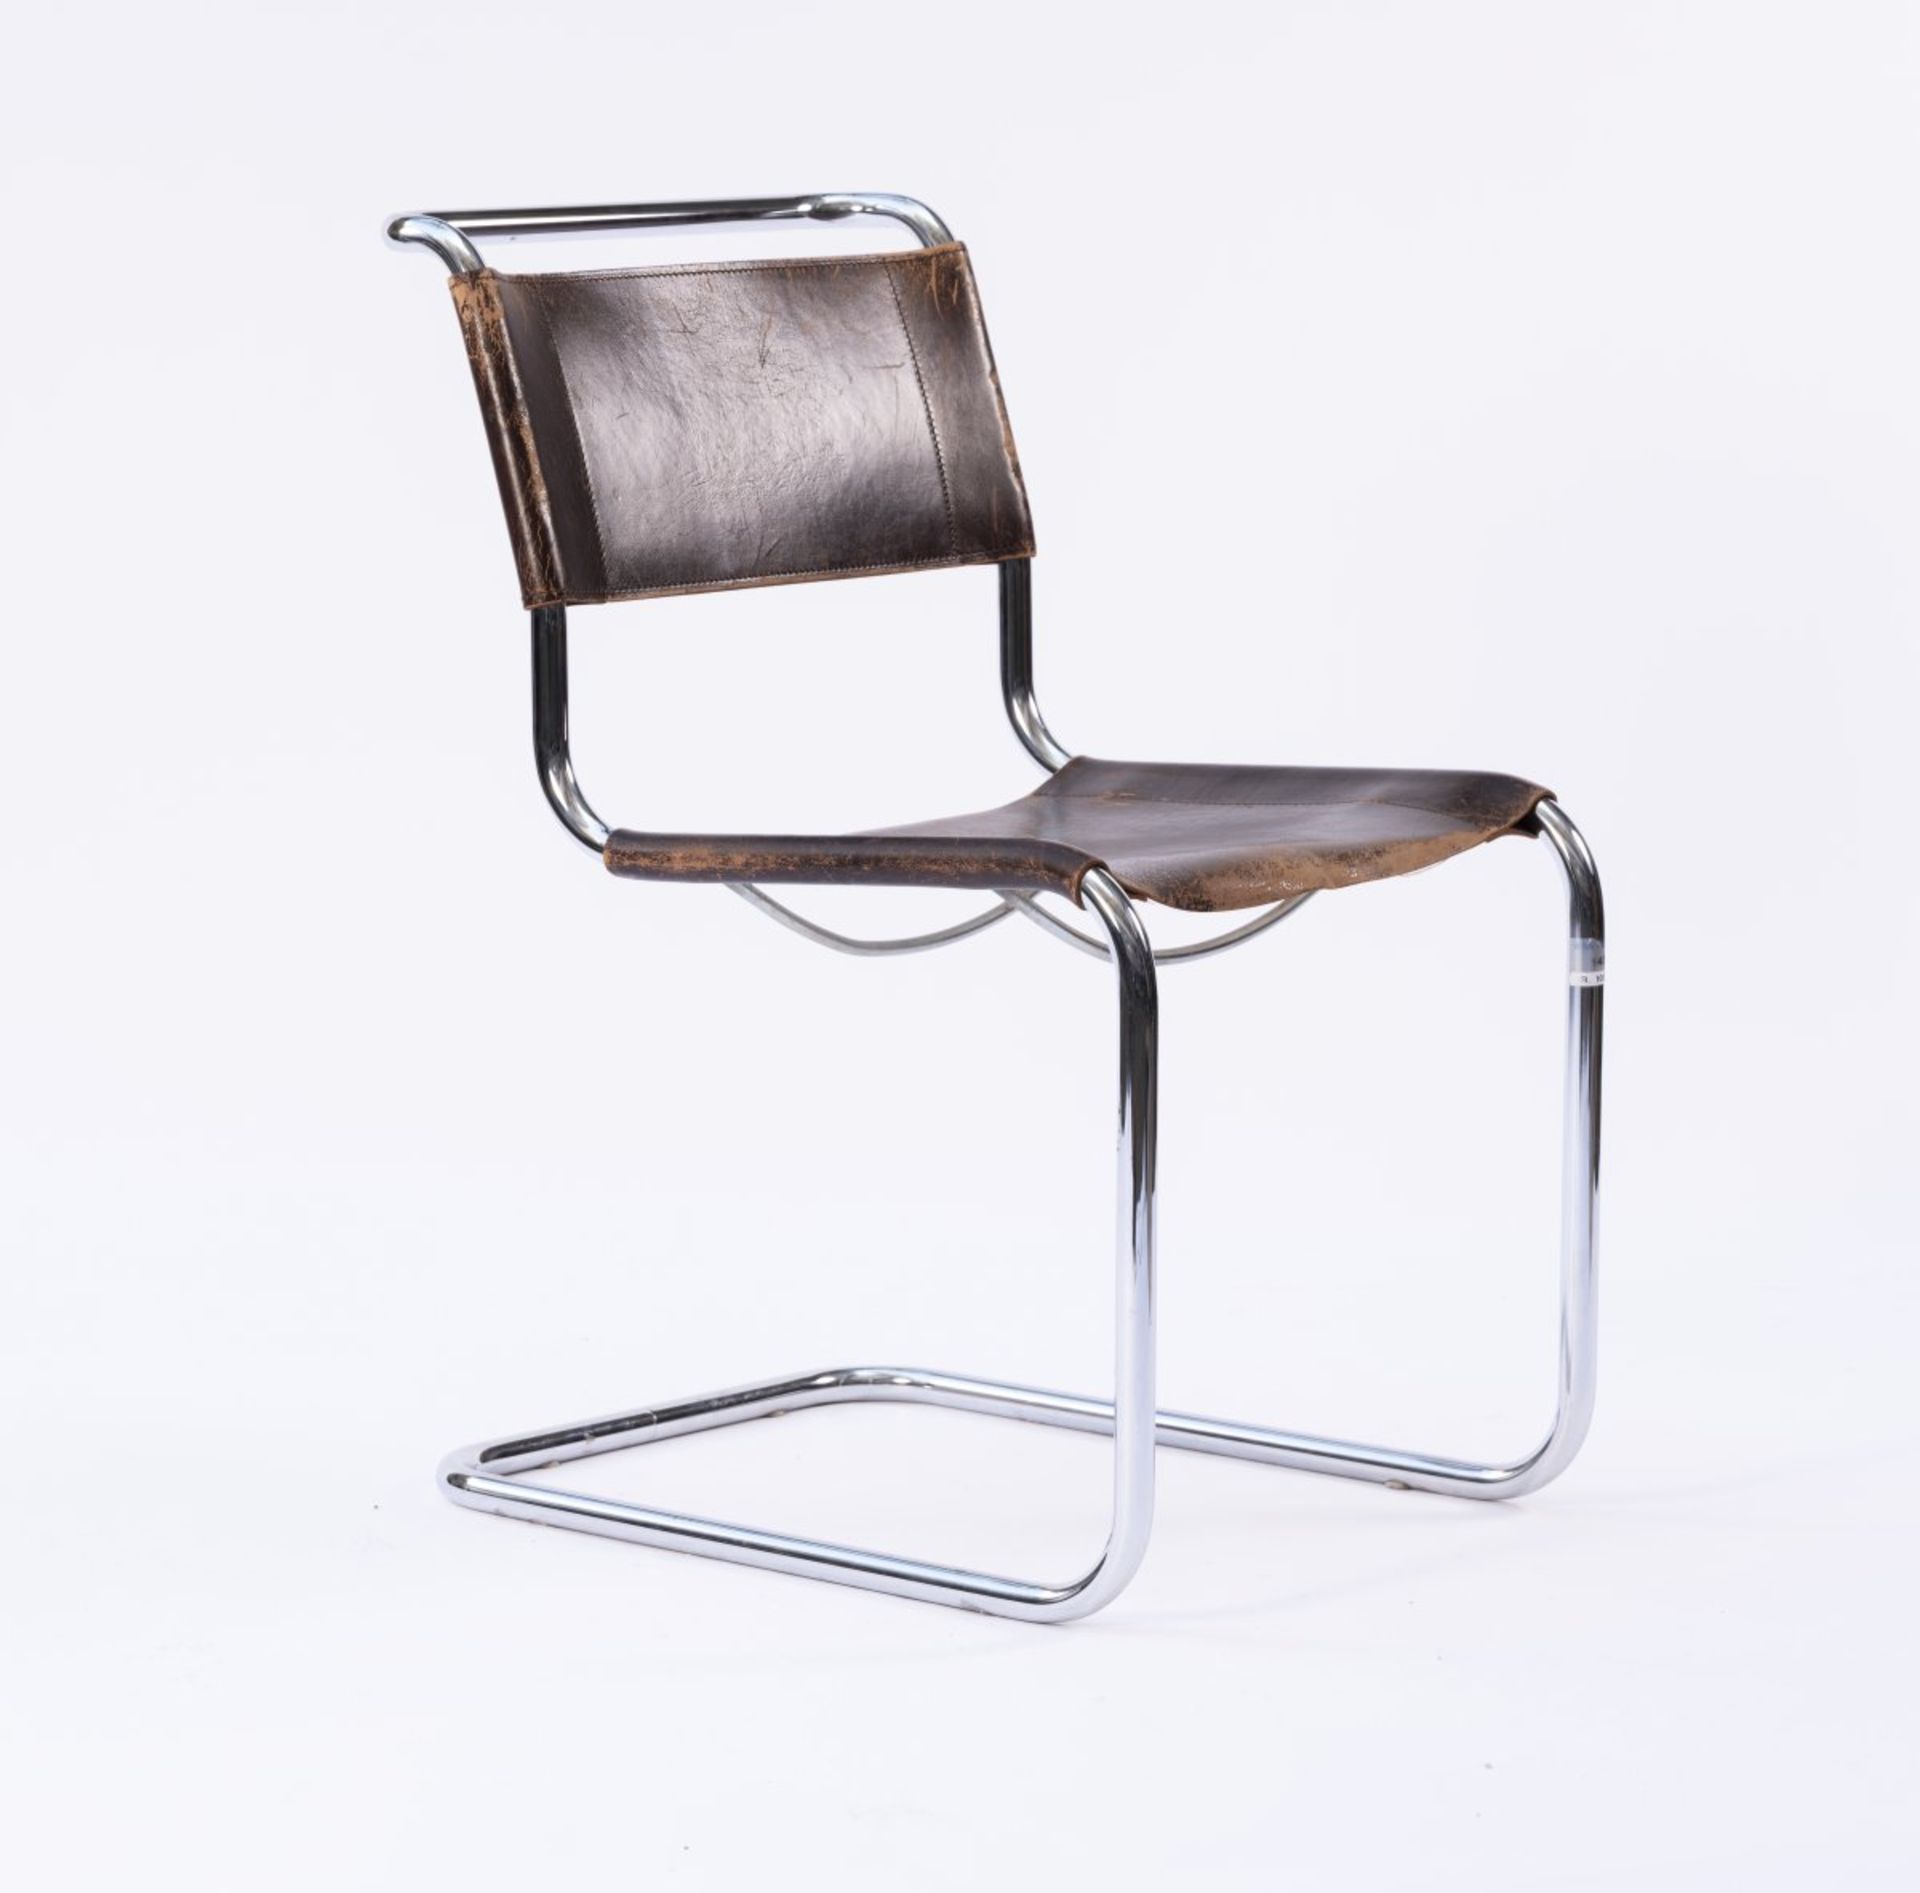 Marcel Breuer, Eight chairs 'B 33', 1927/28 - Image 14 of 14